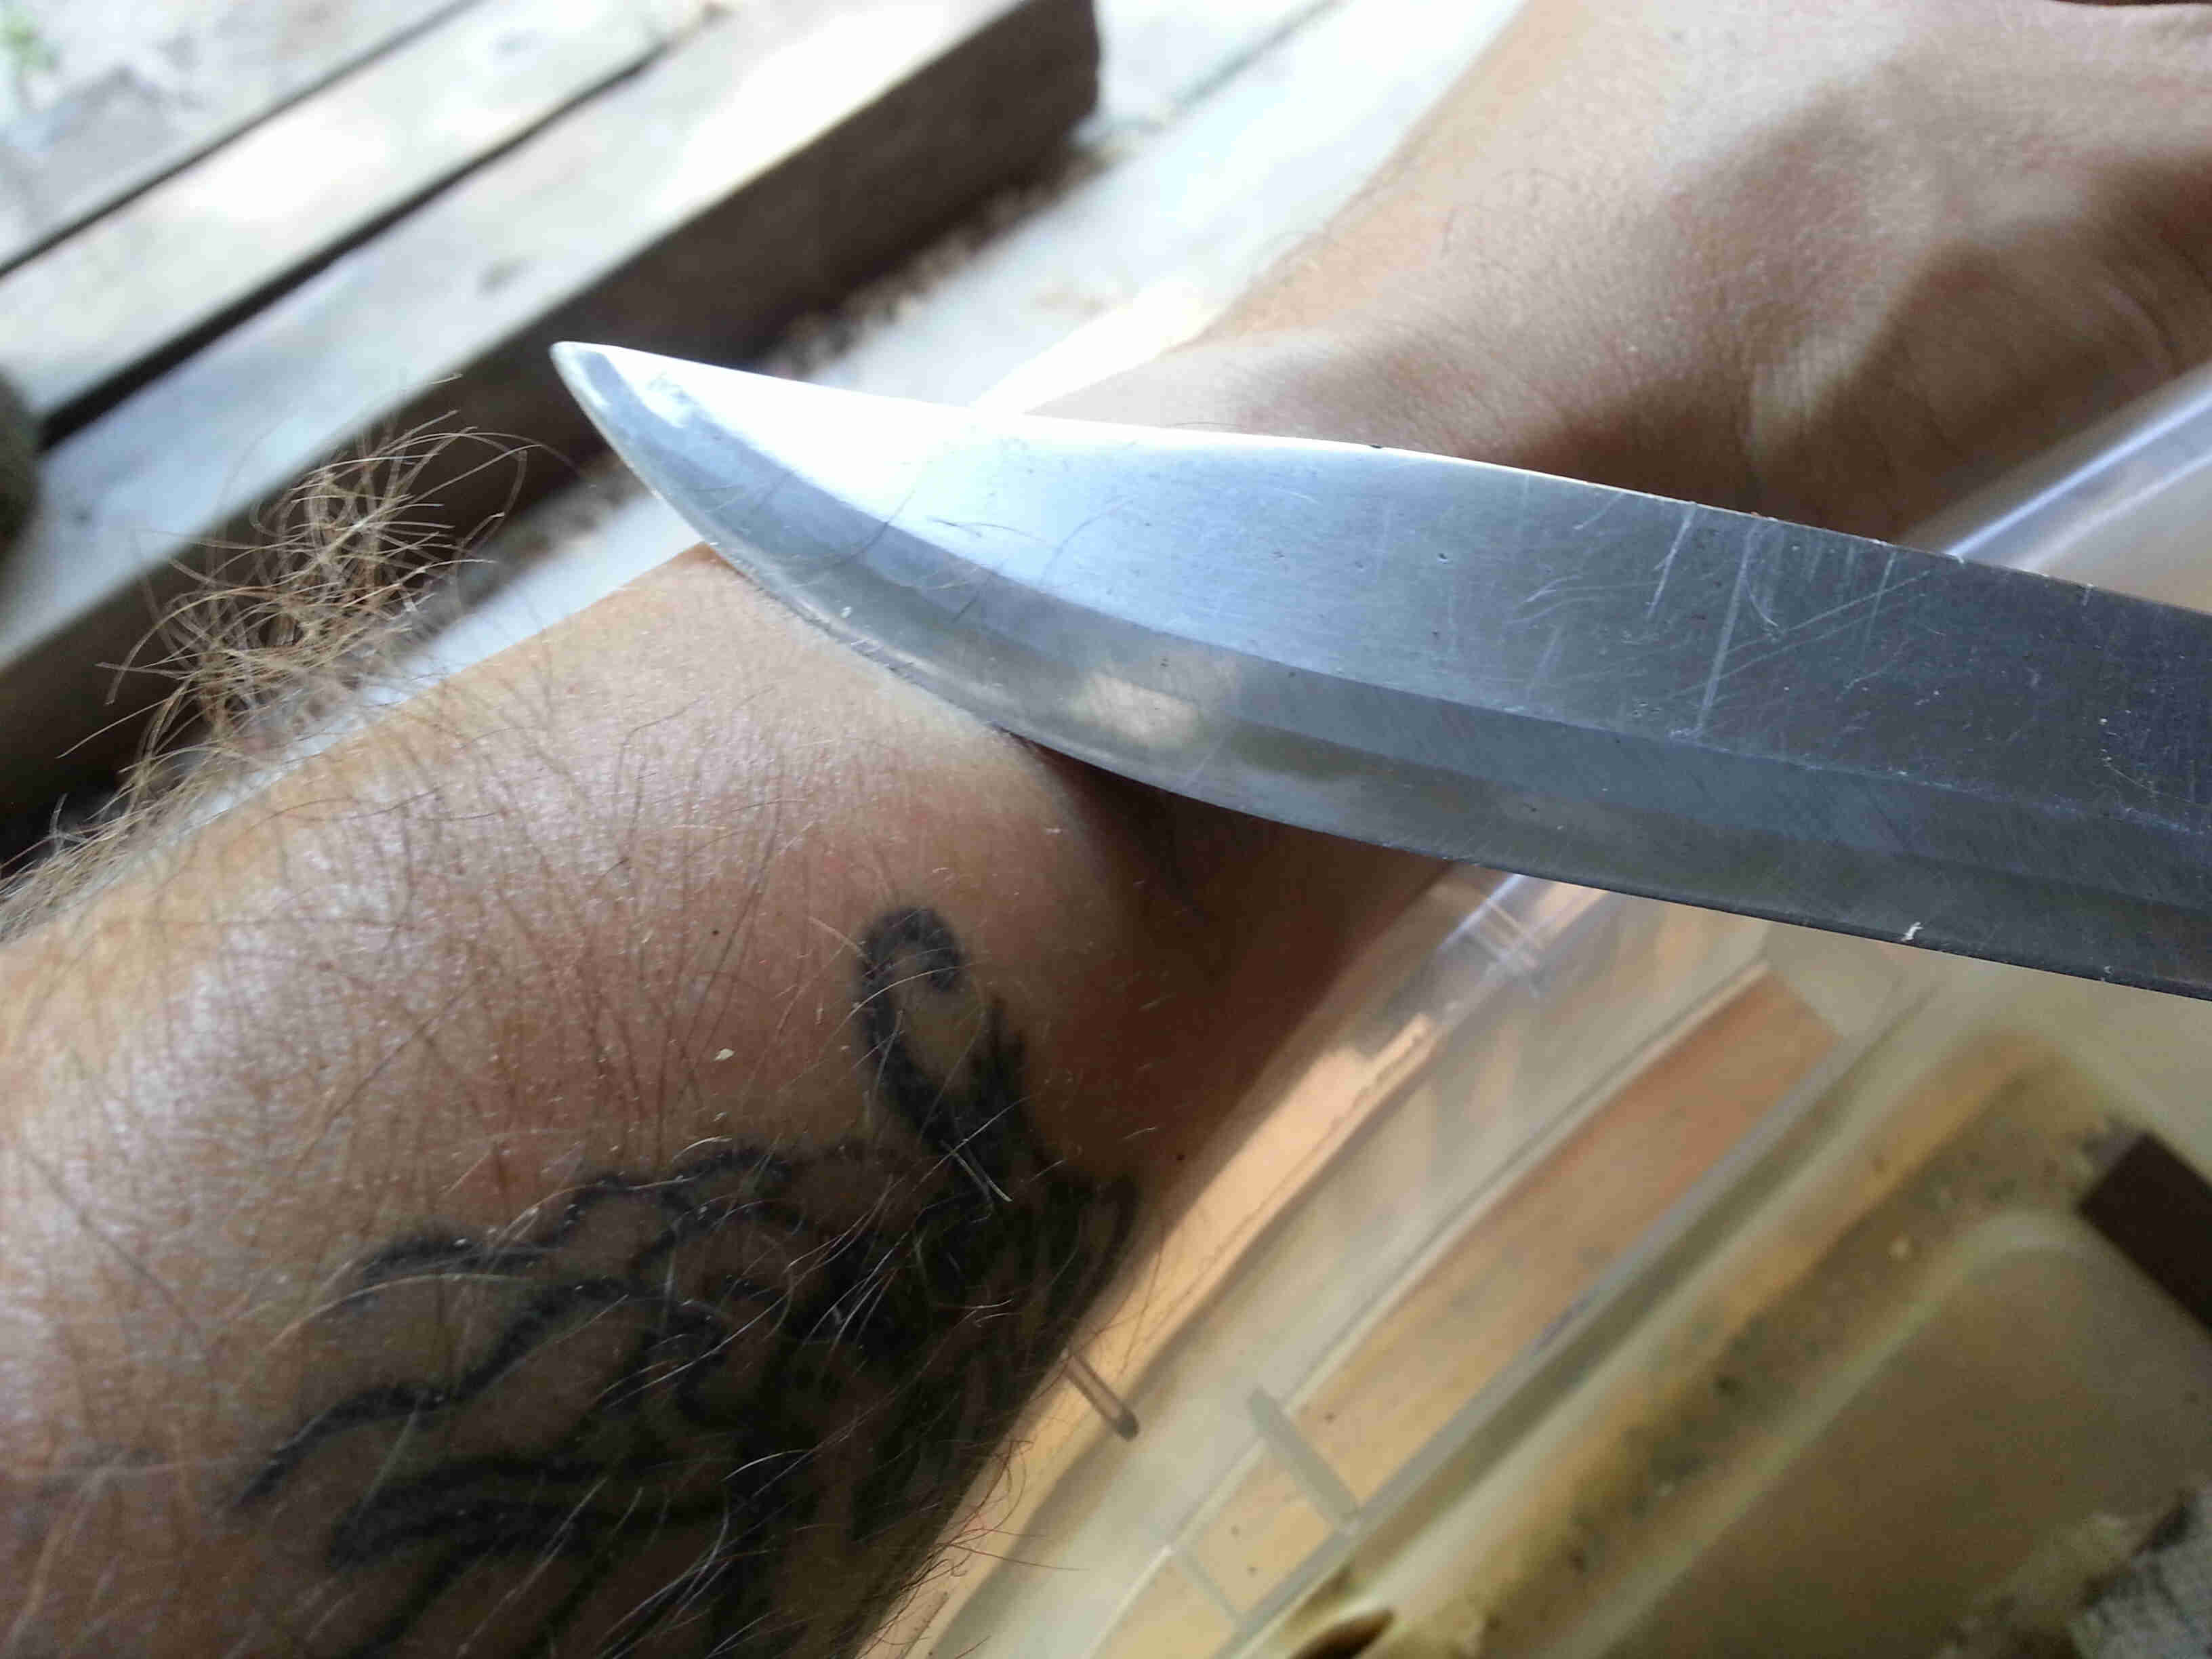 Downward view of a knife blade, shaving hair from a person's arm